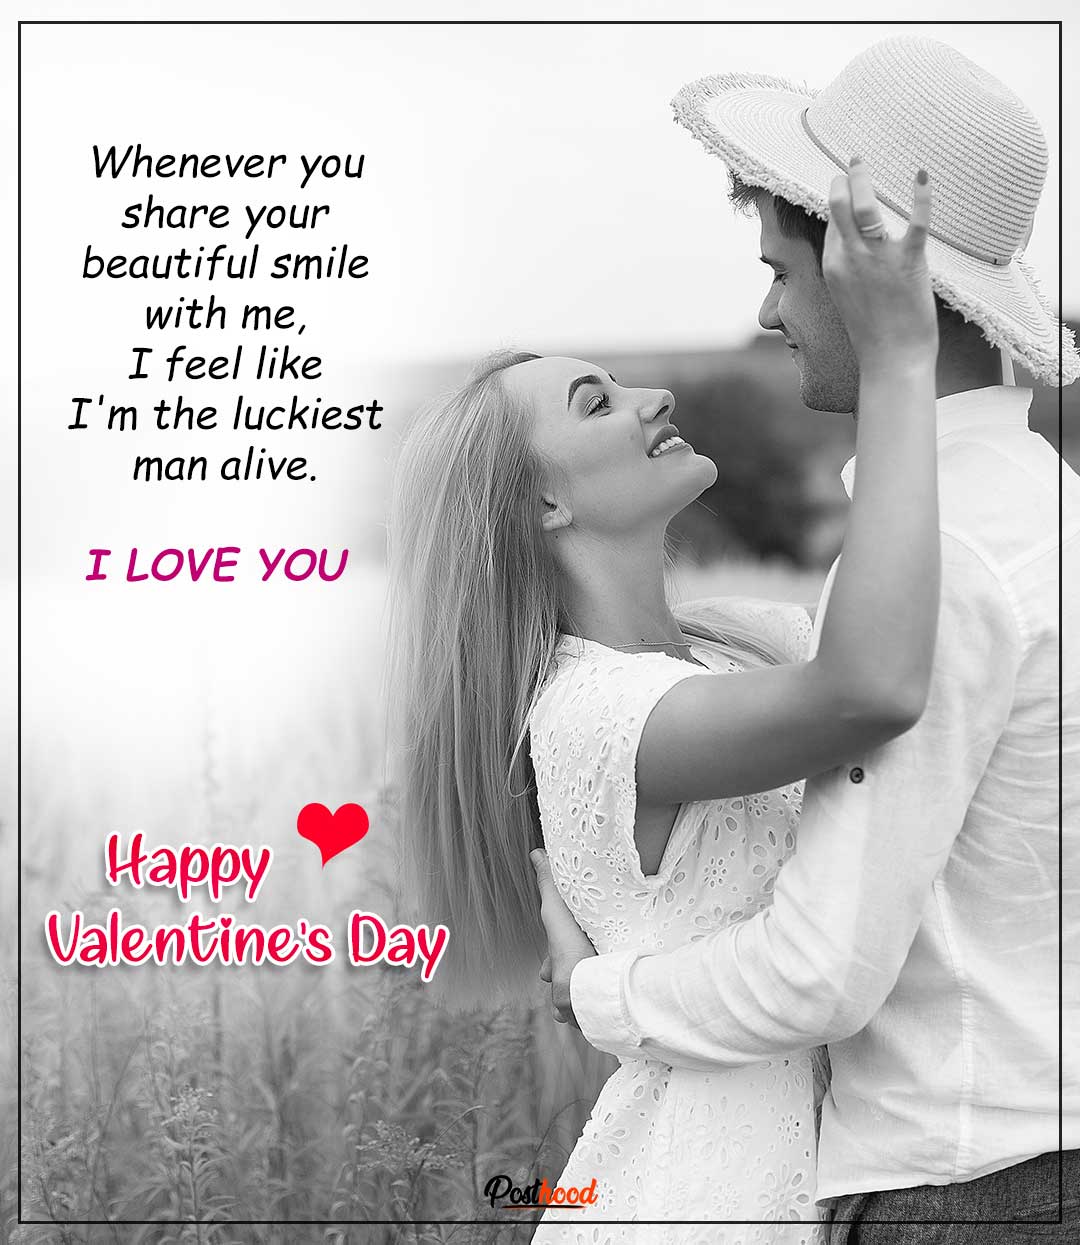 25 sweet love messages for her. These valentine messages will wrap her heart with a sweet feeling and recharge your love again.